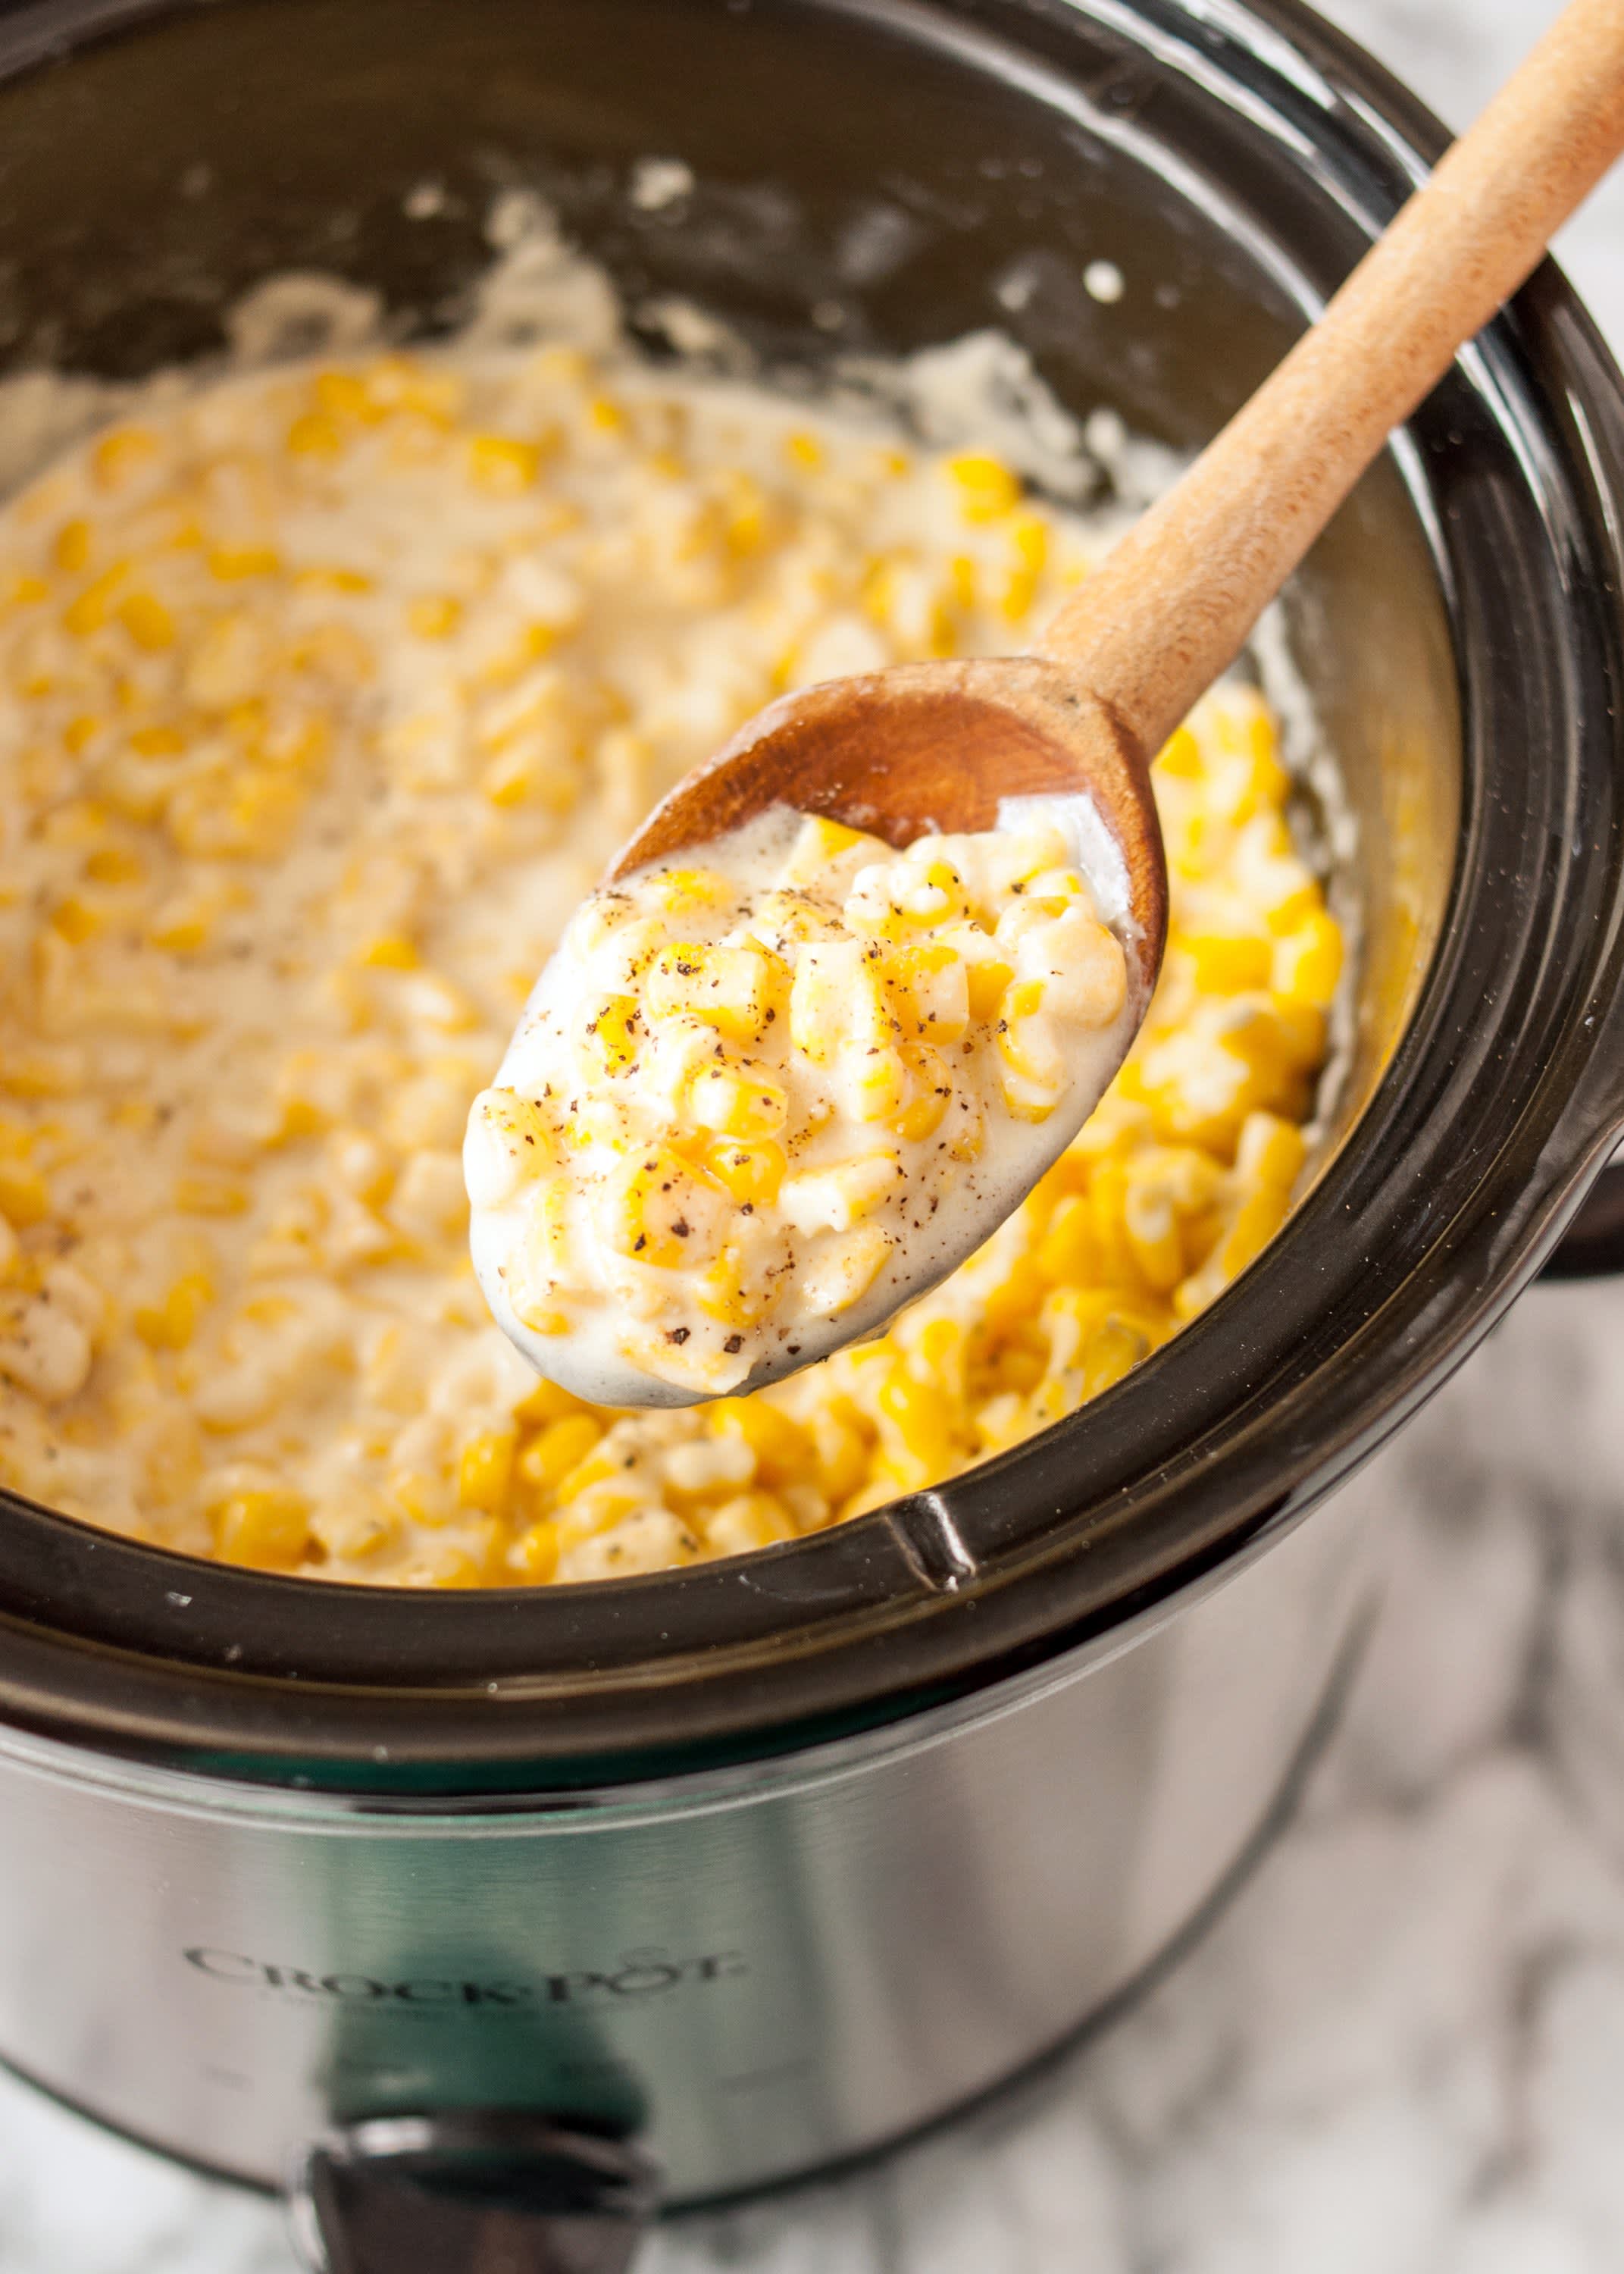 How To Make Slow Cooker Creamed Corn - Recipe | Kitchn